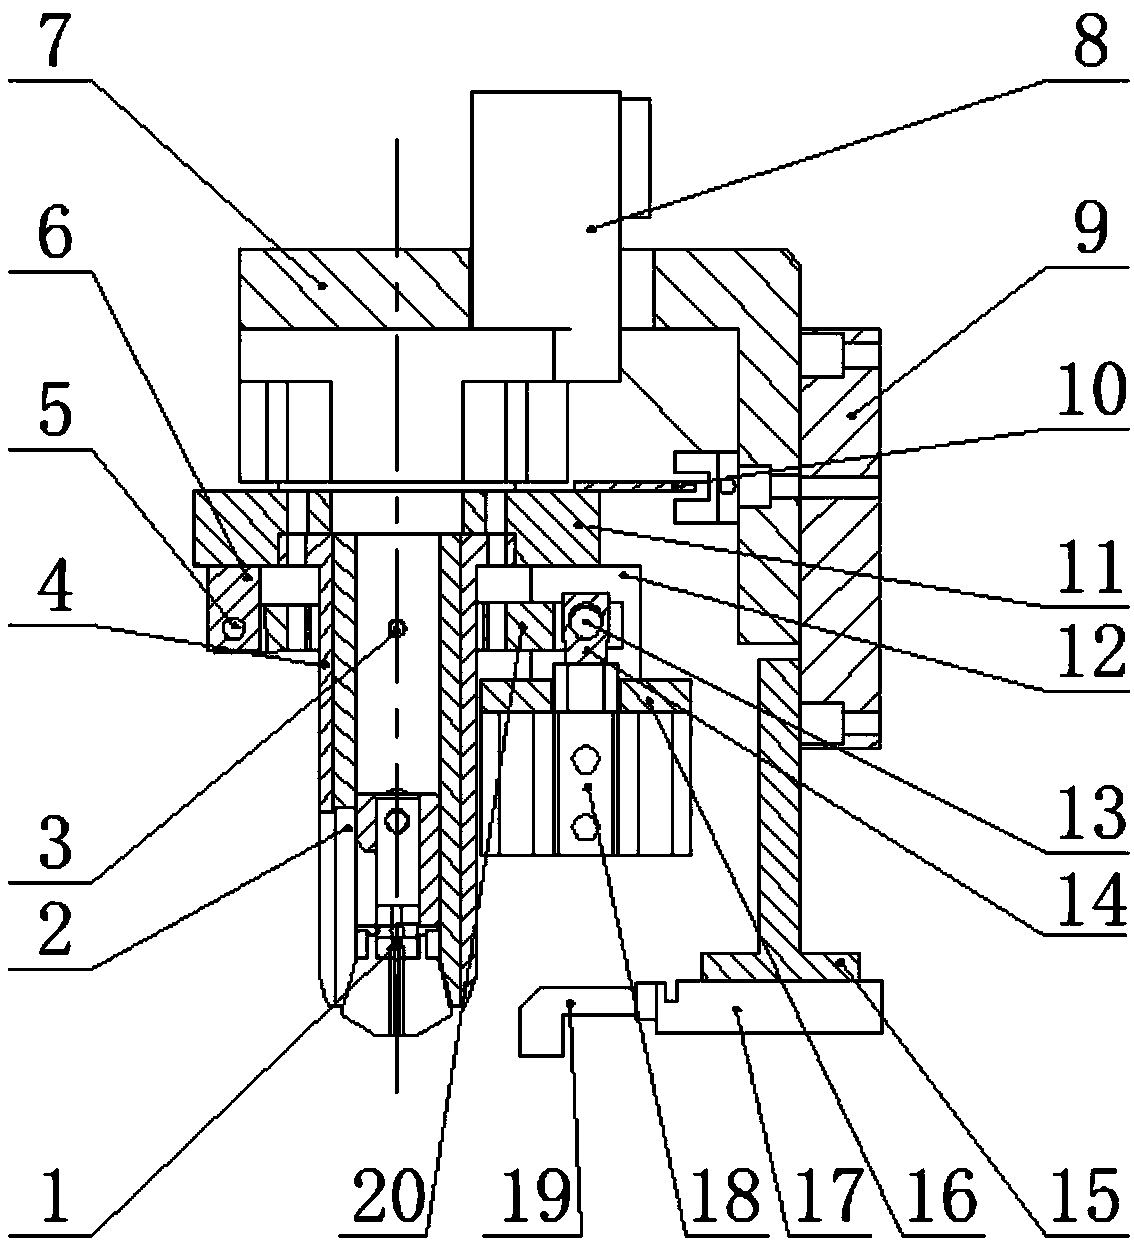 Coupling Z axis rotating device